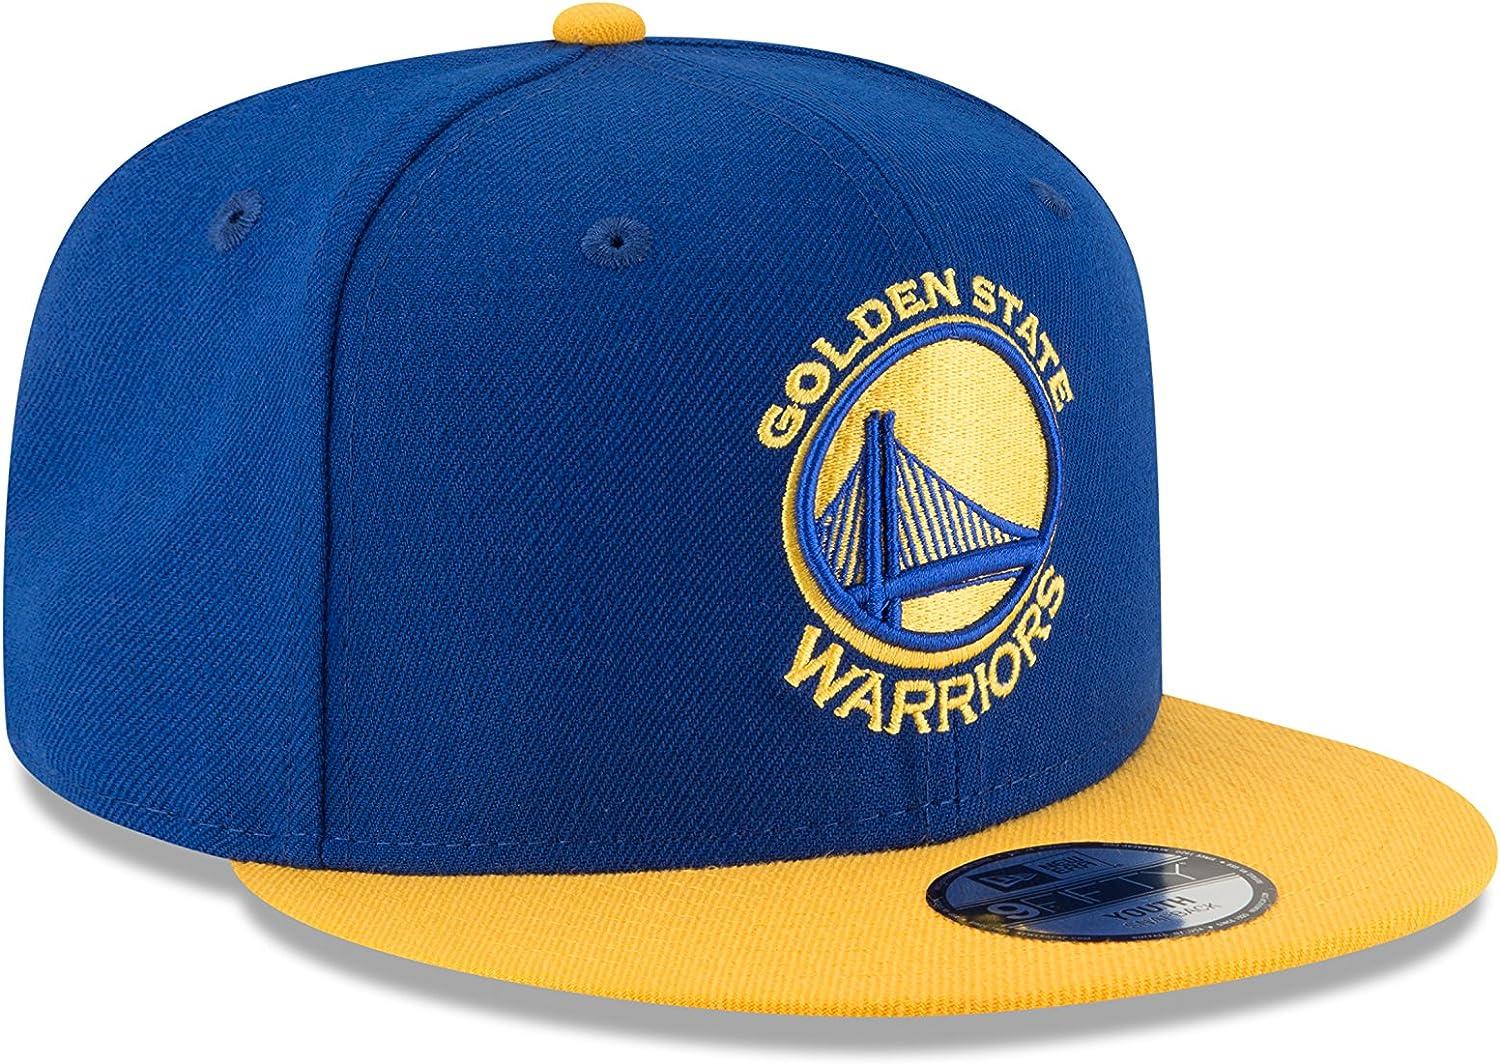 warriors youth hat